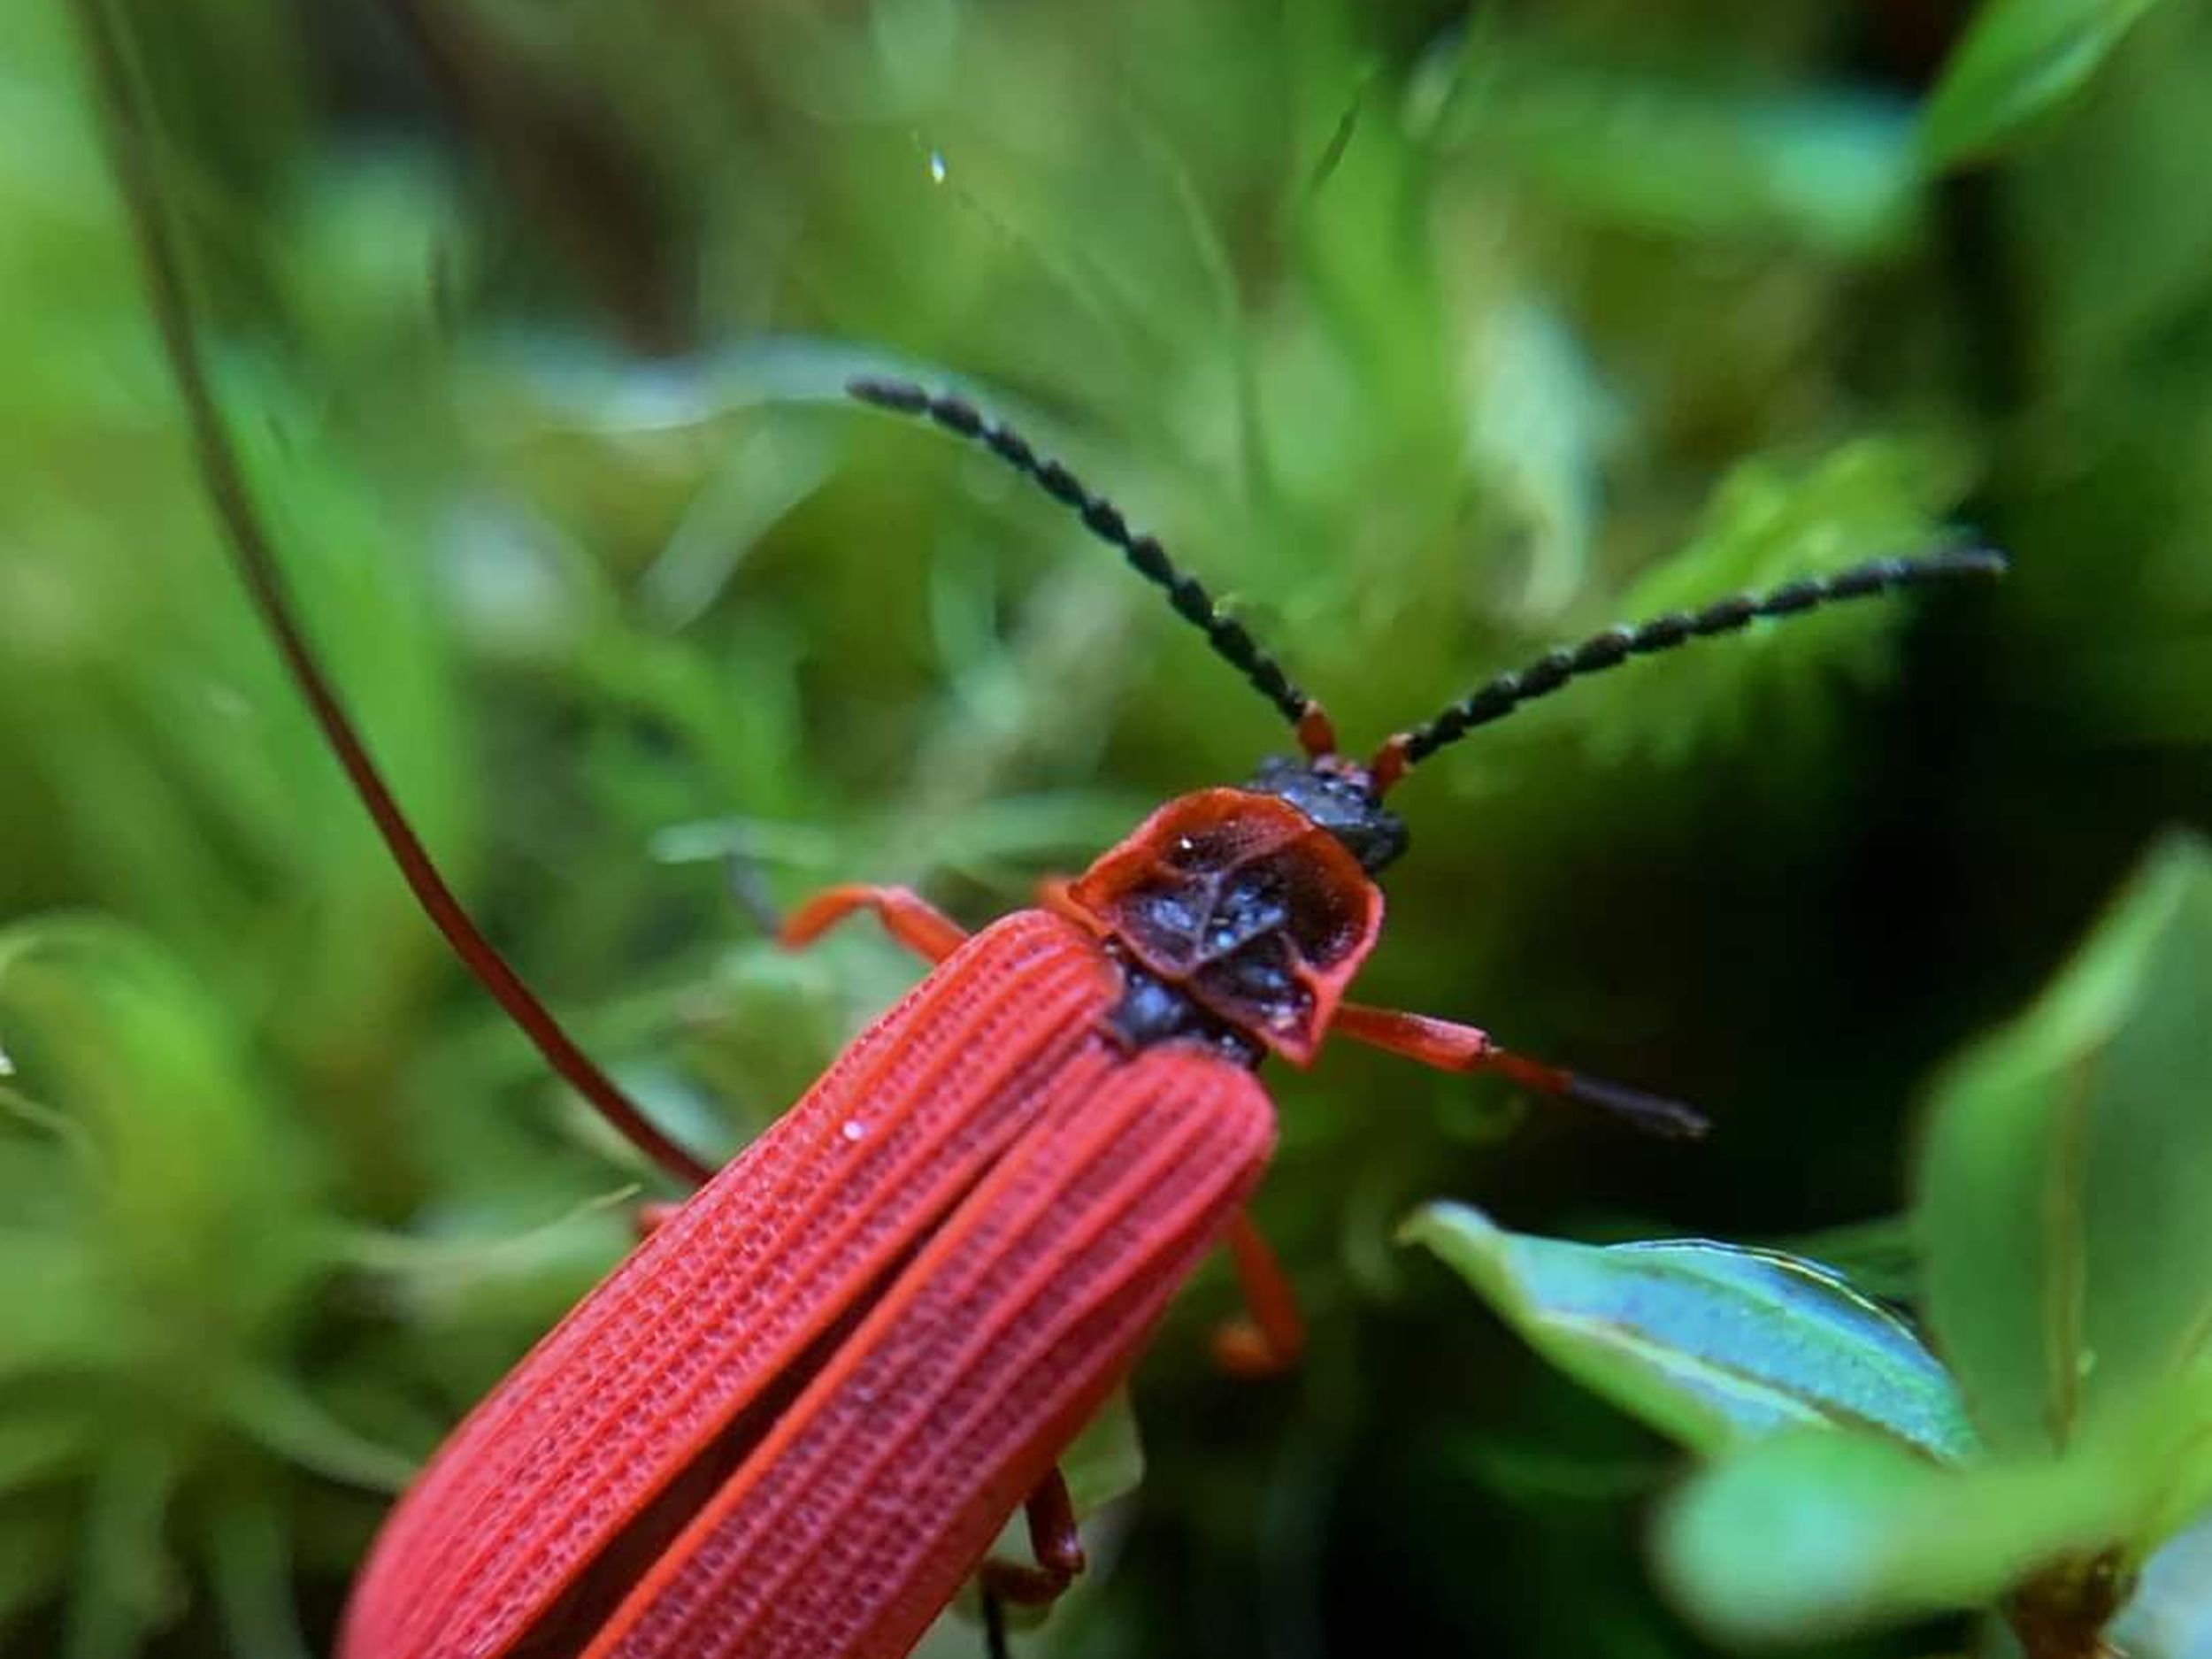 Bugging the Northwest: The bright side of this beetle is its stinky warning